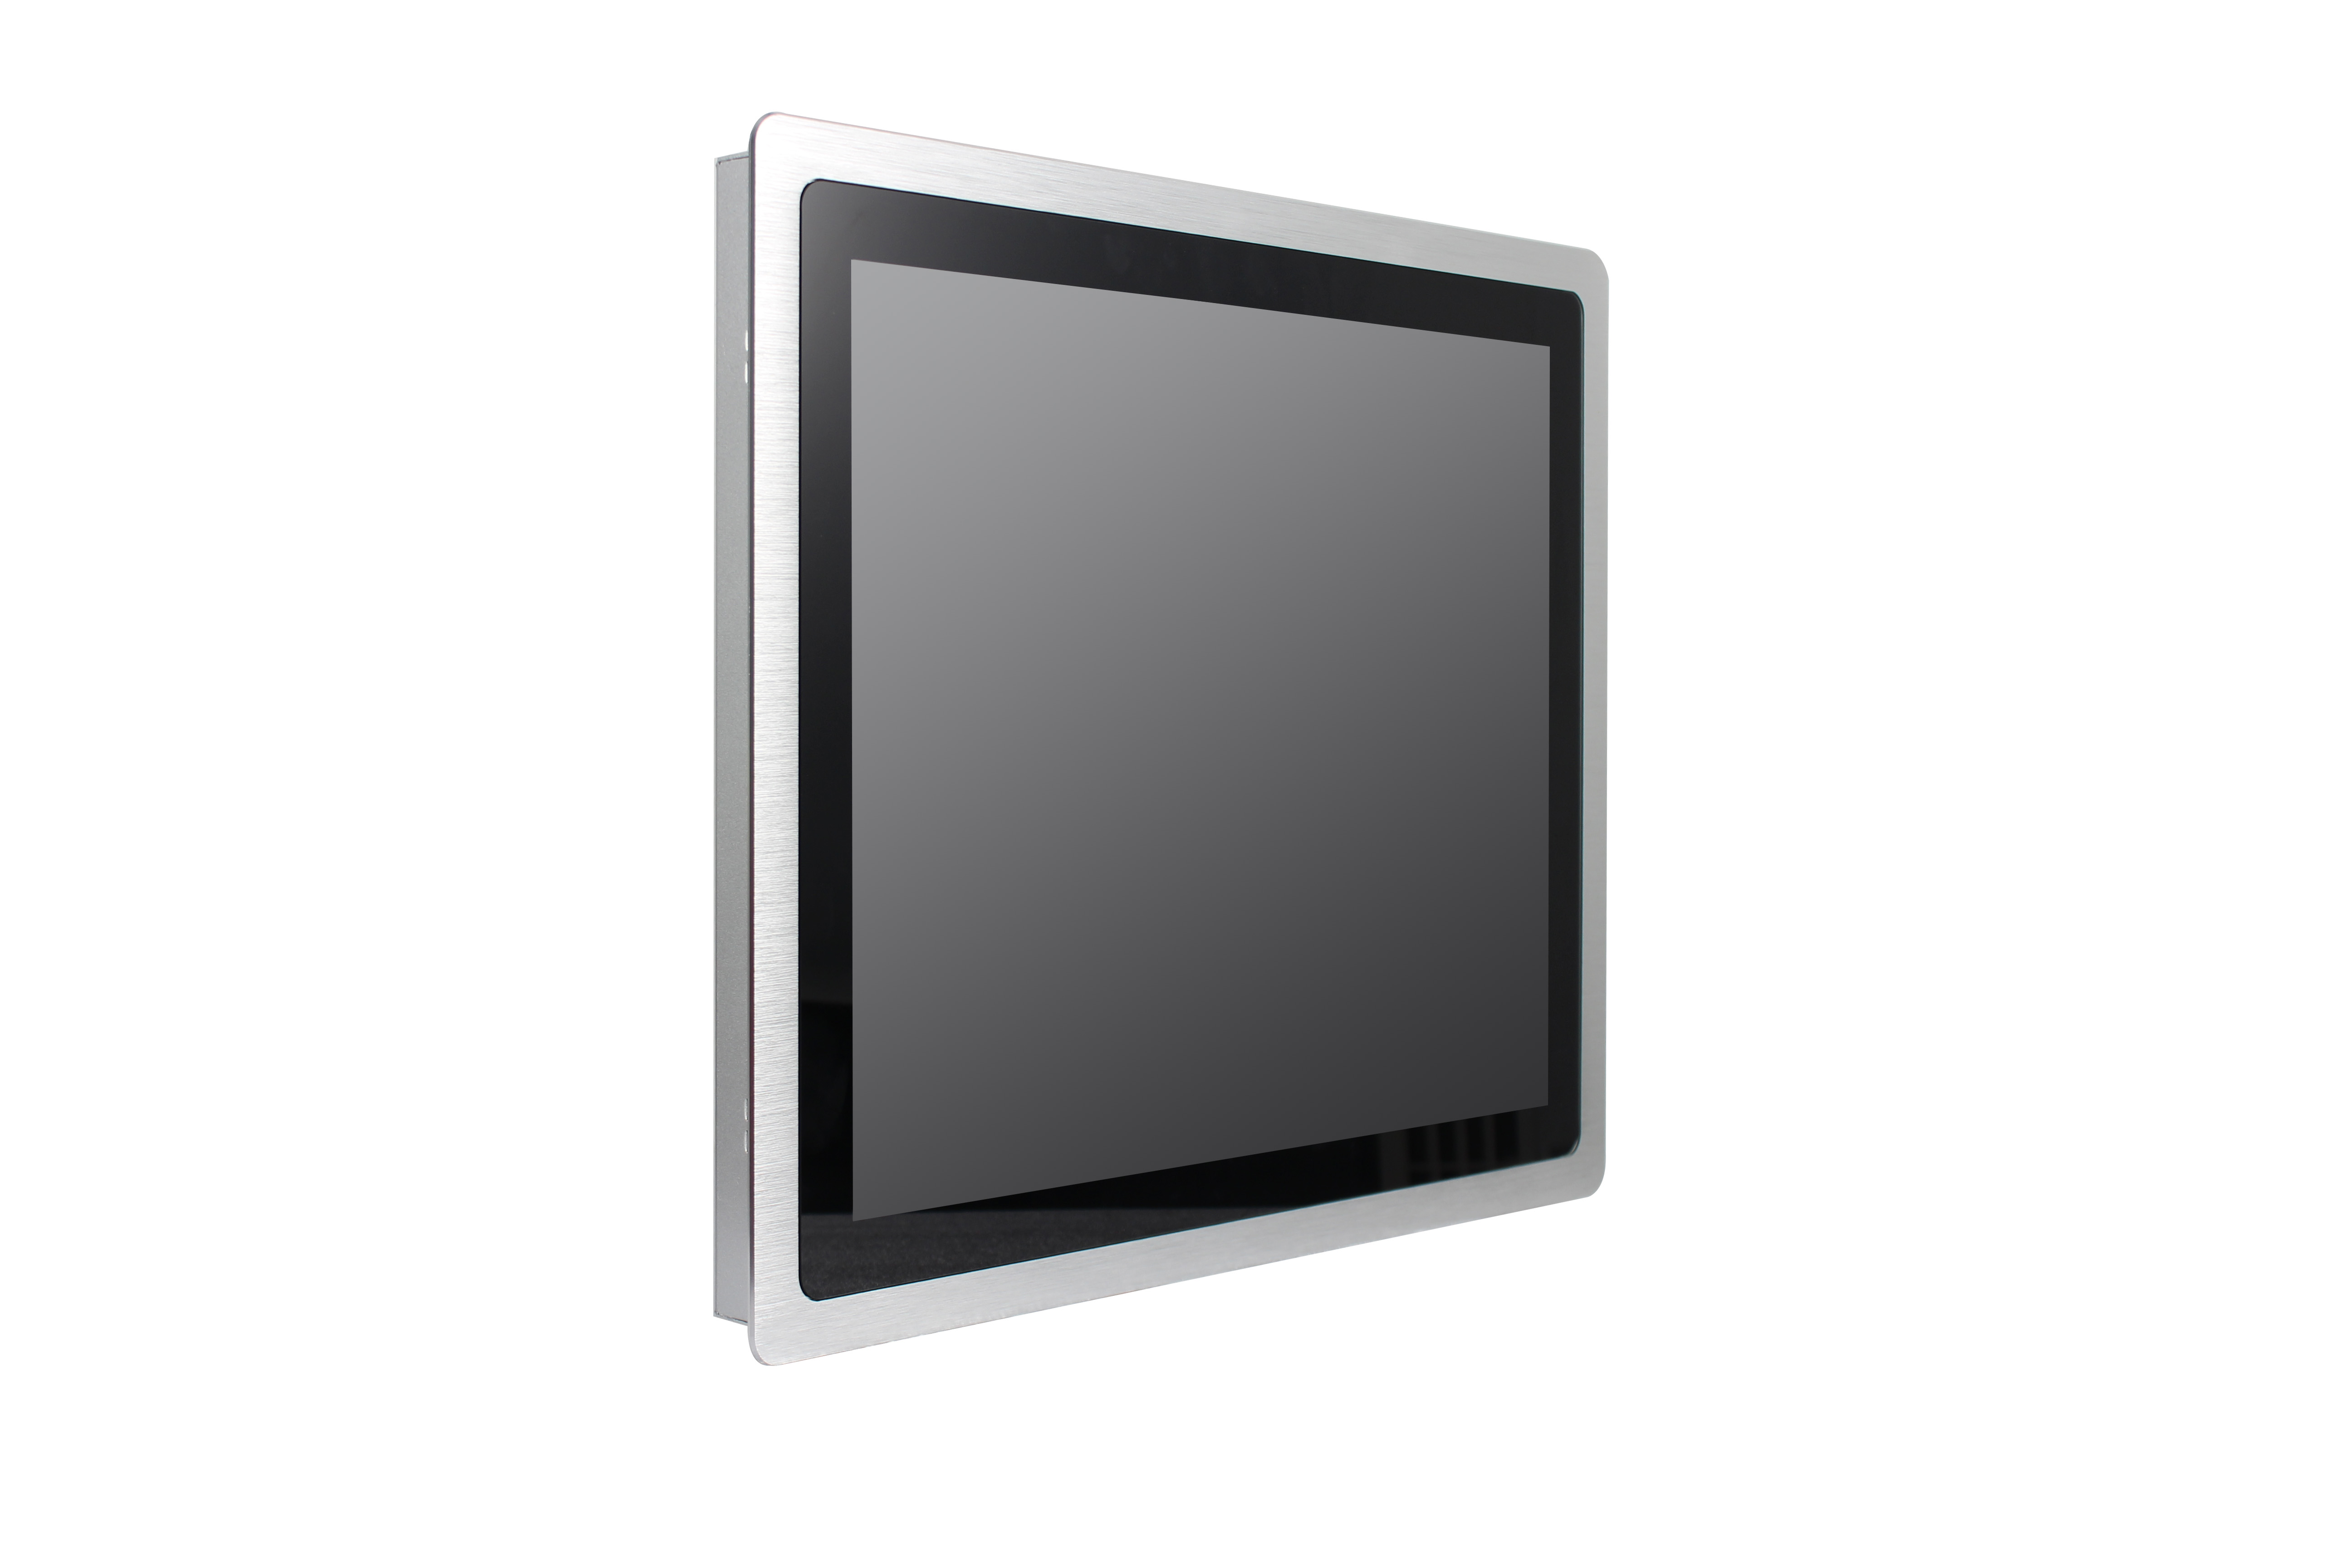 10.4inch industrial panel mount monitor